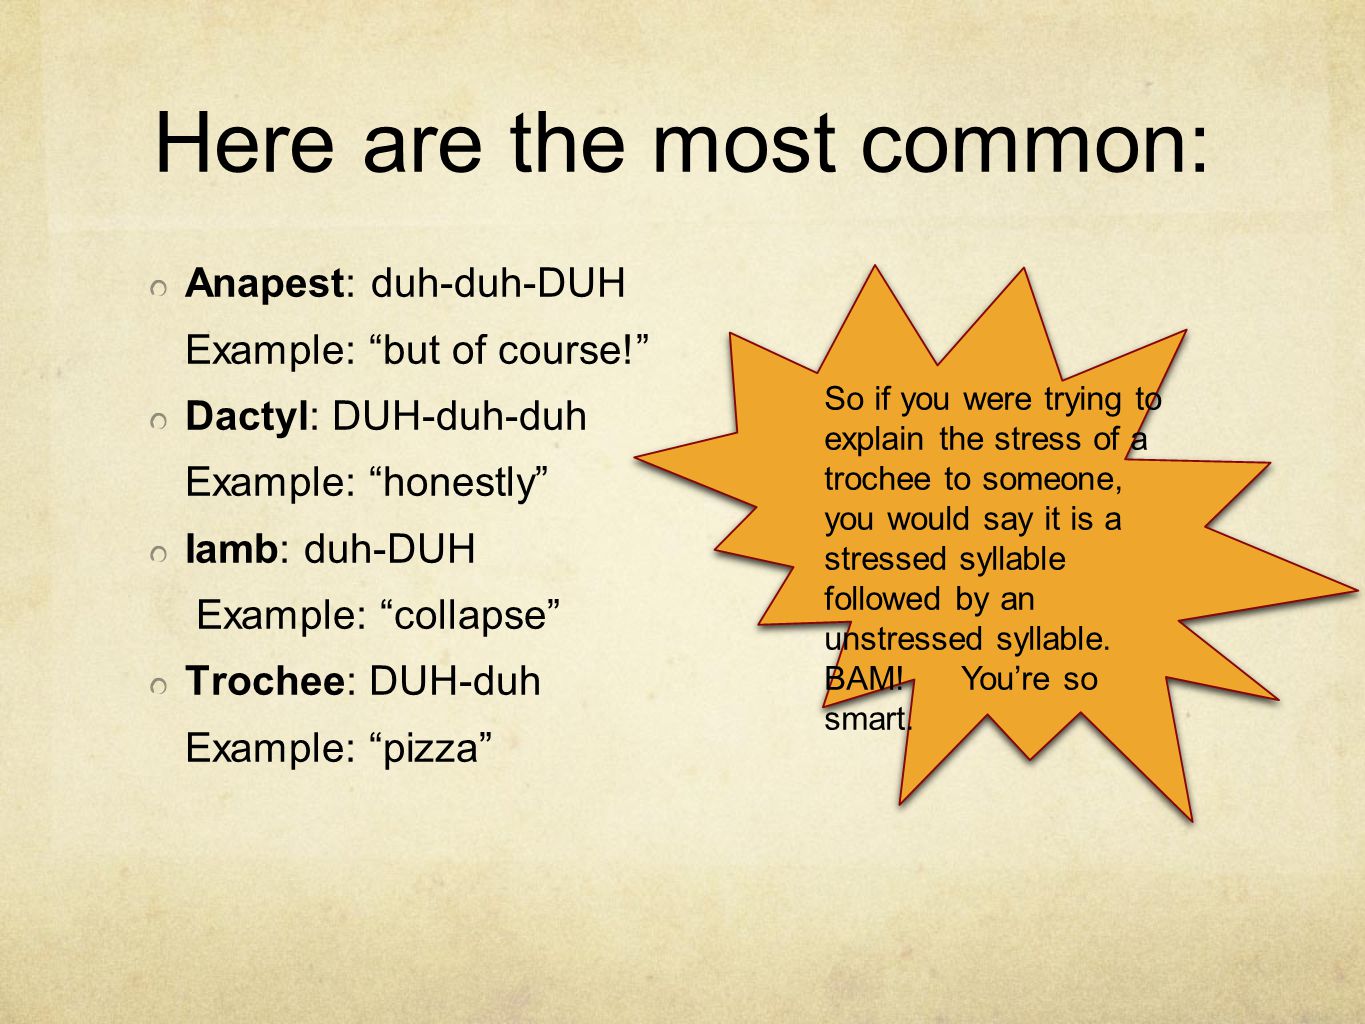 Here are the most common: